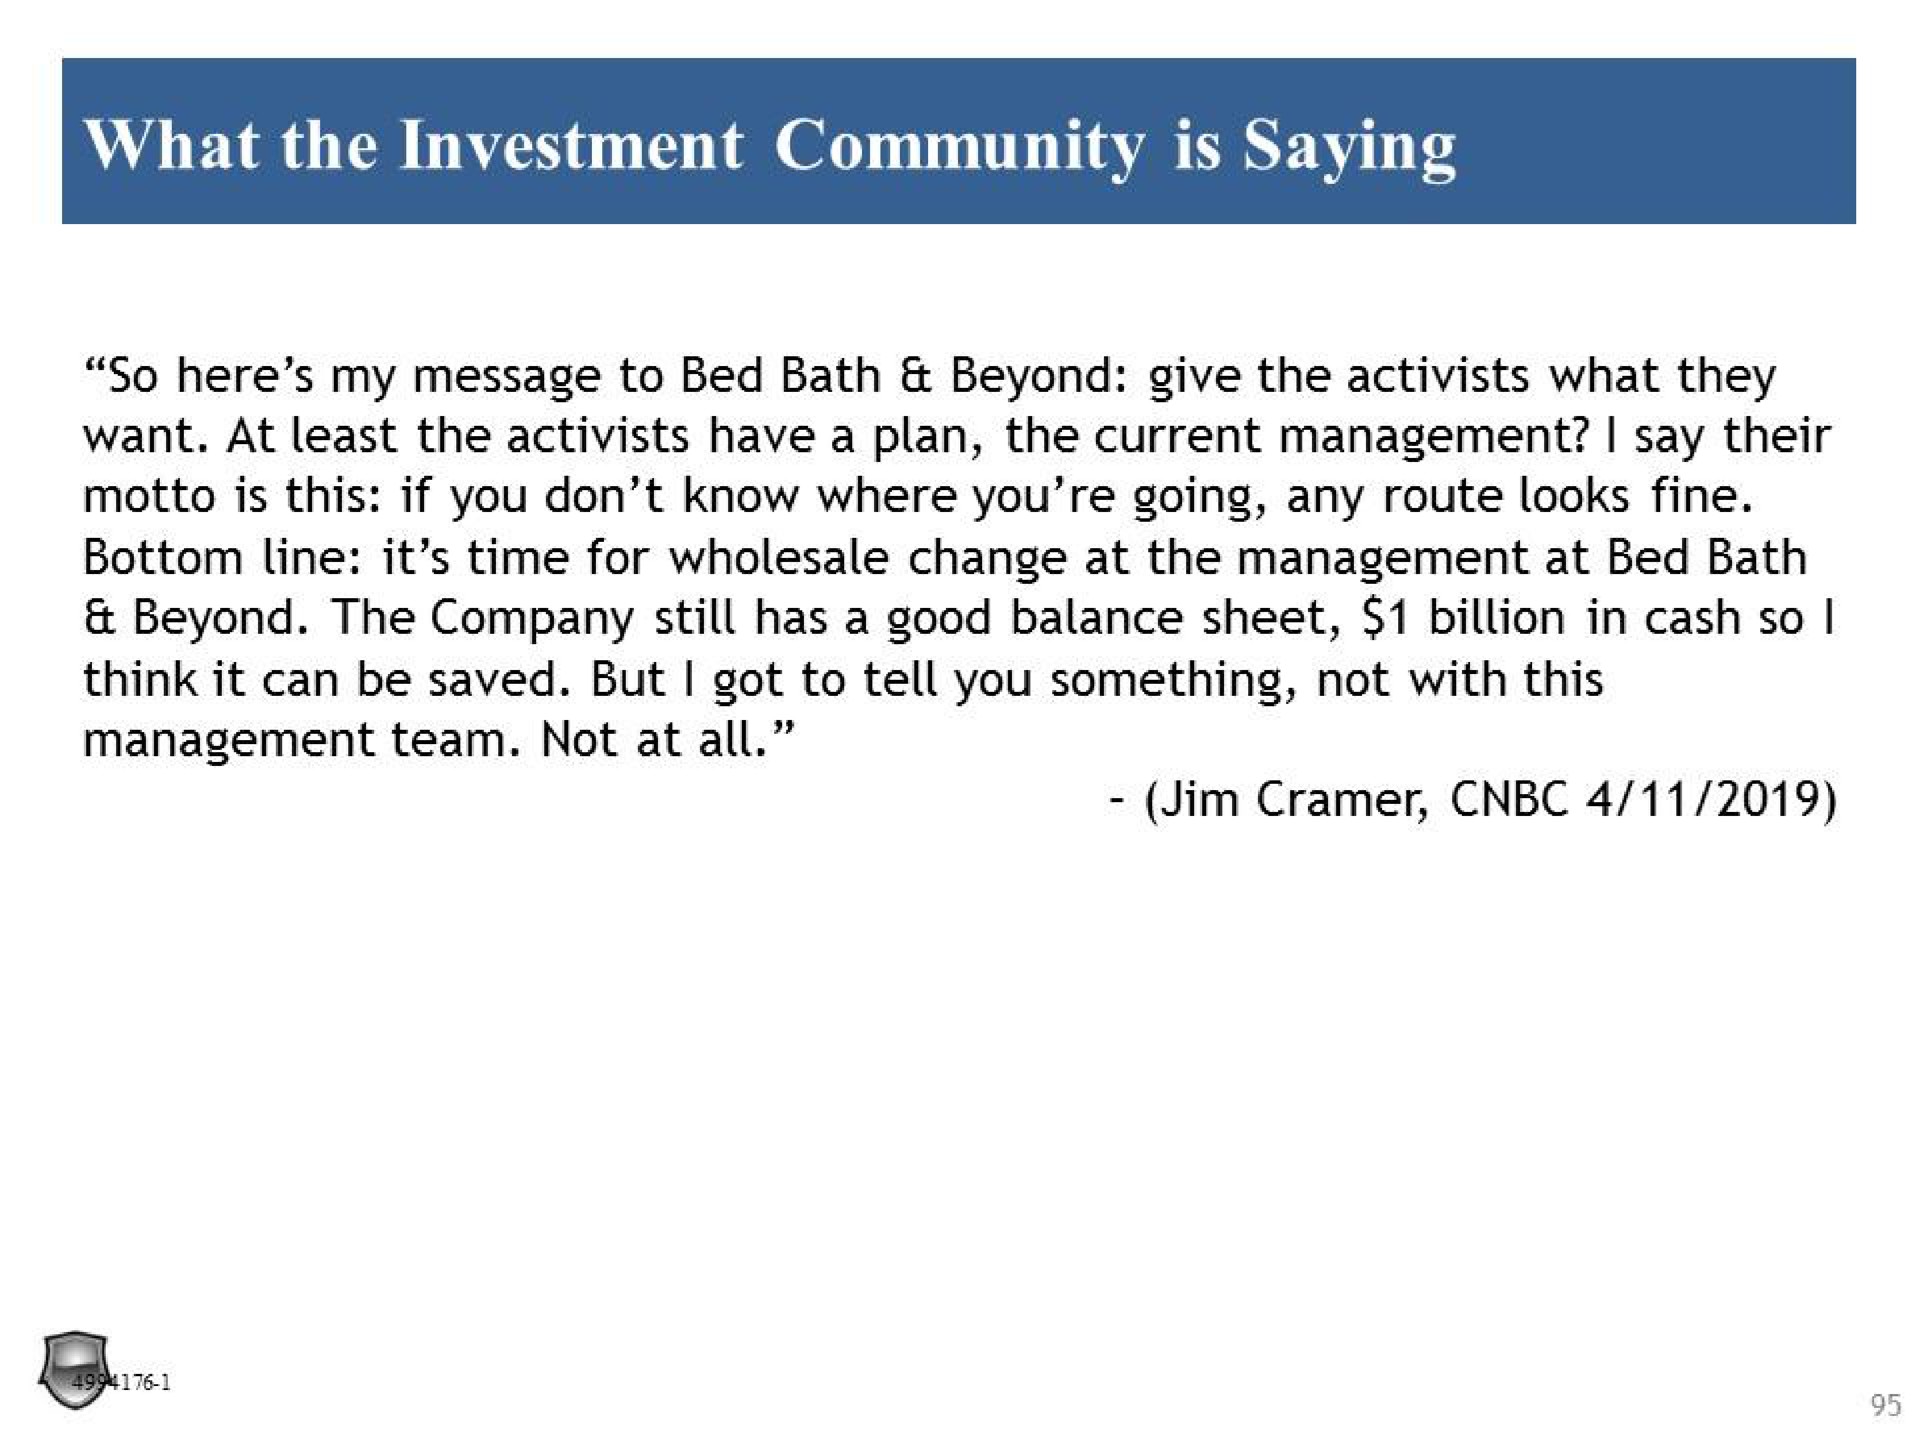 what the investment community is saying so here my message to bed bath beyond give the activists what they want at least the activists have a plan the current management say their motto is this if you don know where you going any route looks fine bottom line it time for wholesale change at the management at bed bath beyond the company still has a good balance sheet billion in cash so think it can be saved but got to tell you something not with this management team not at all | Legion Partners